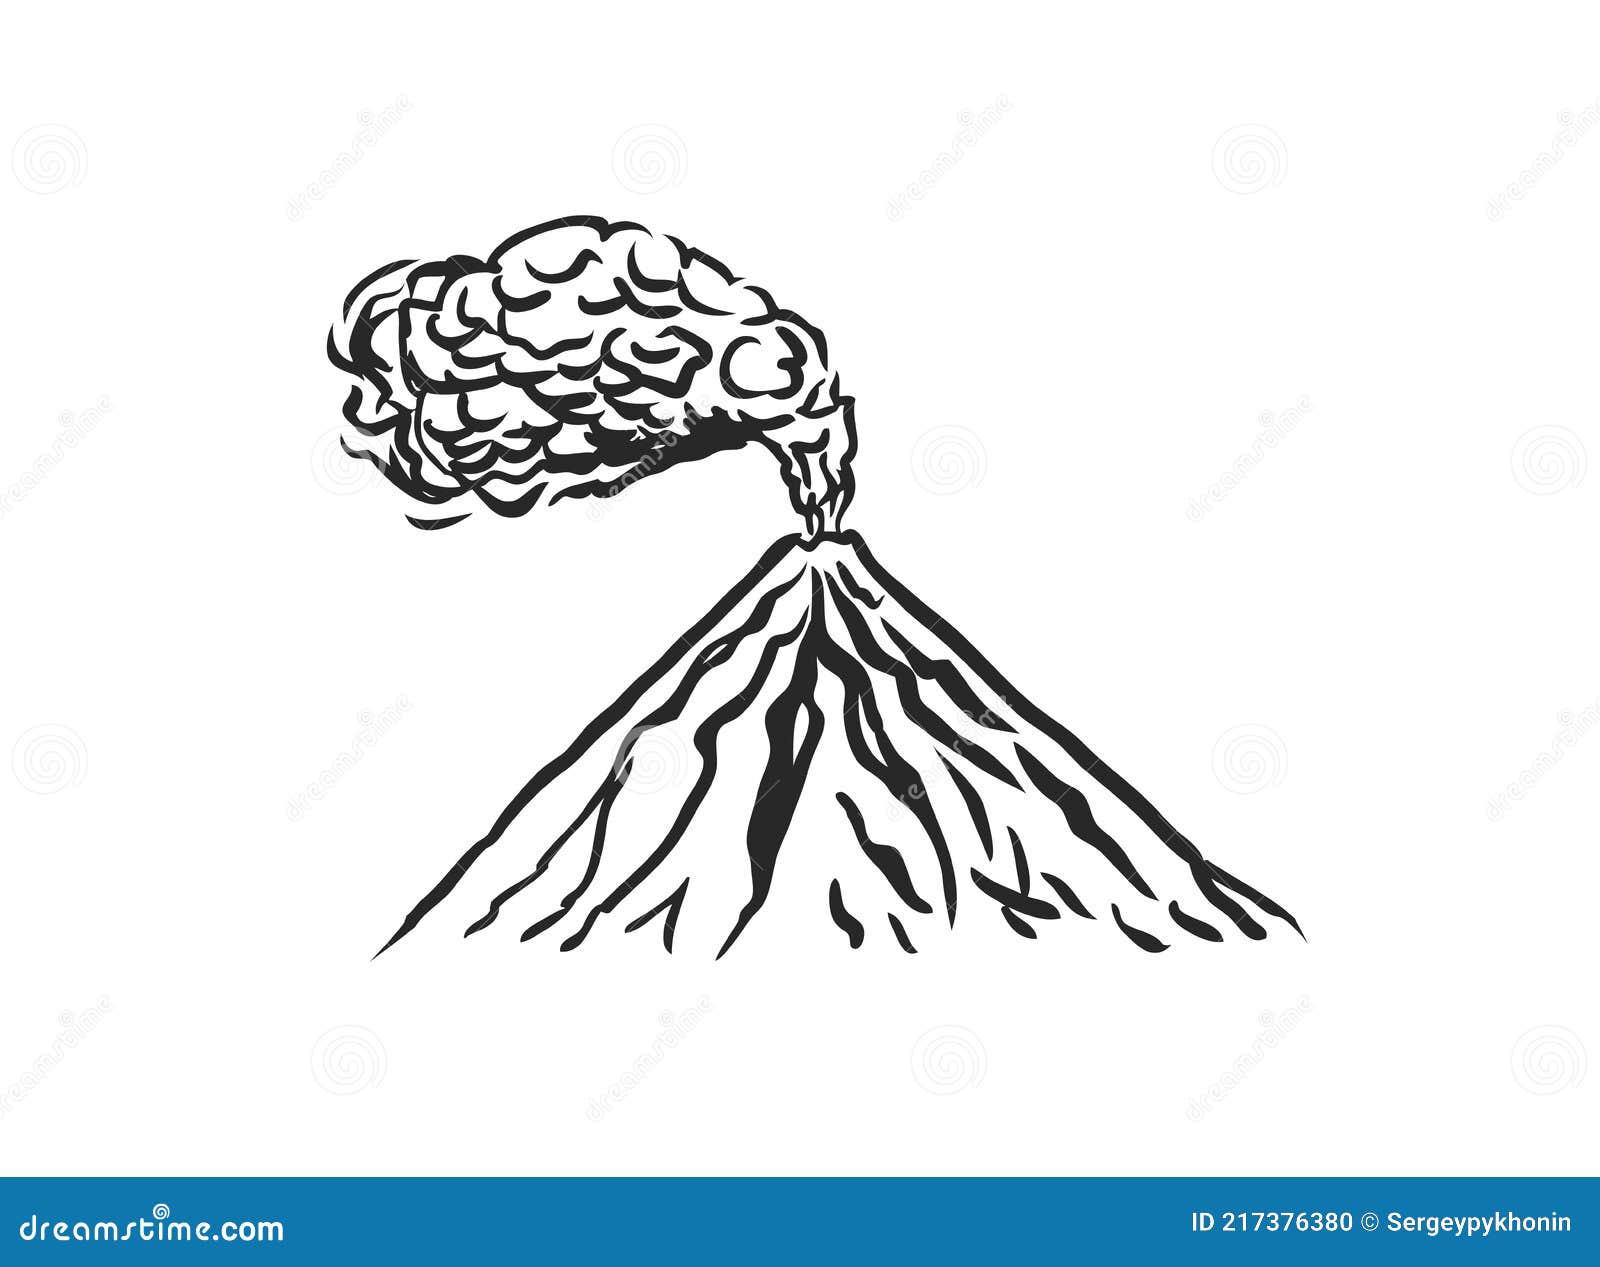 Volcanic Eruption Drawing HighRes Vector Graphic  Getty Images